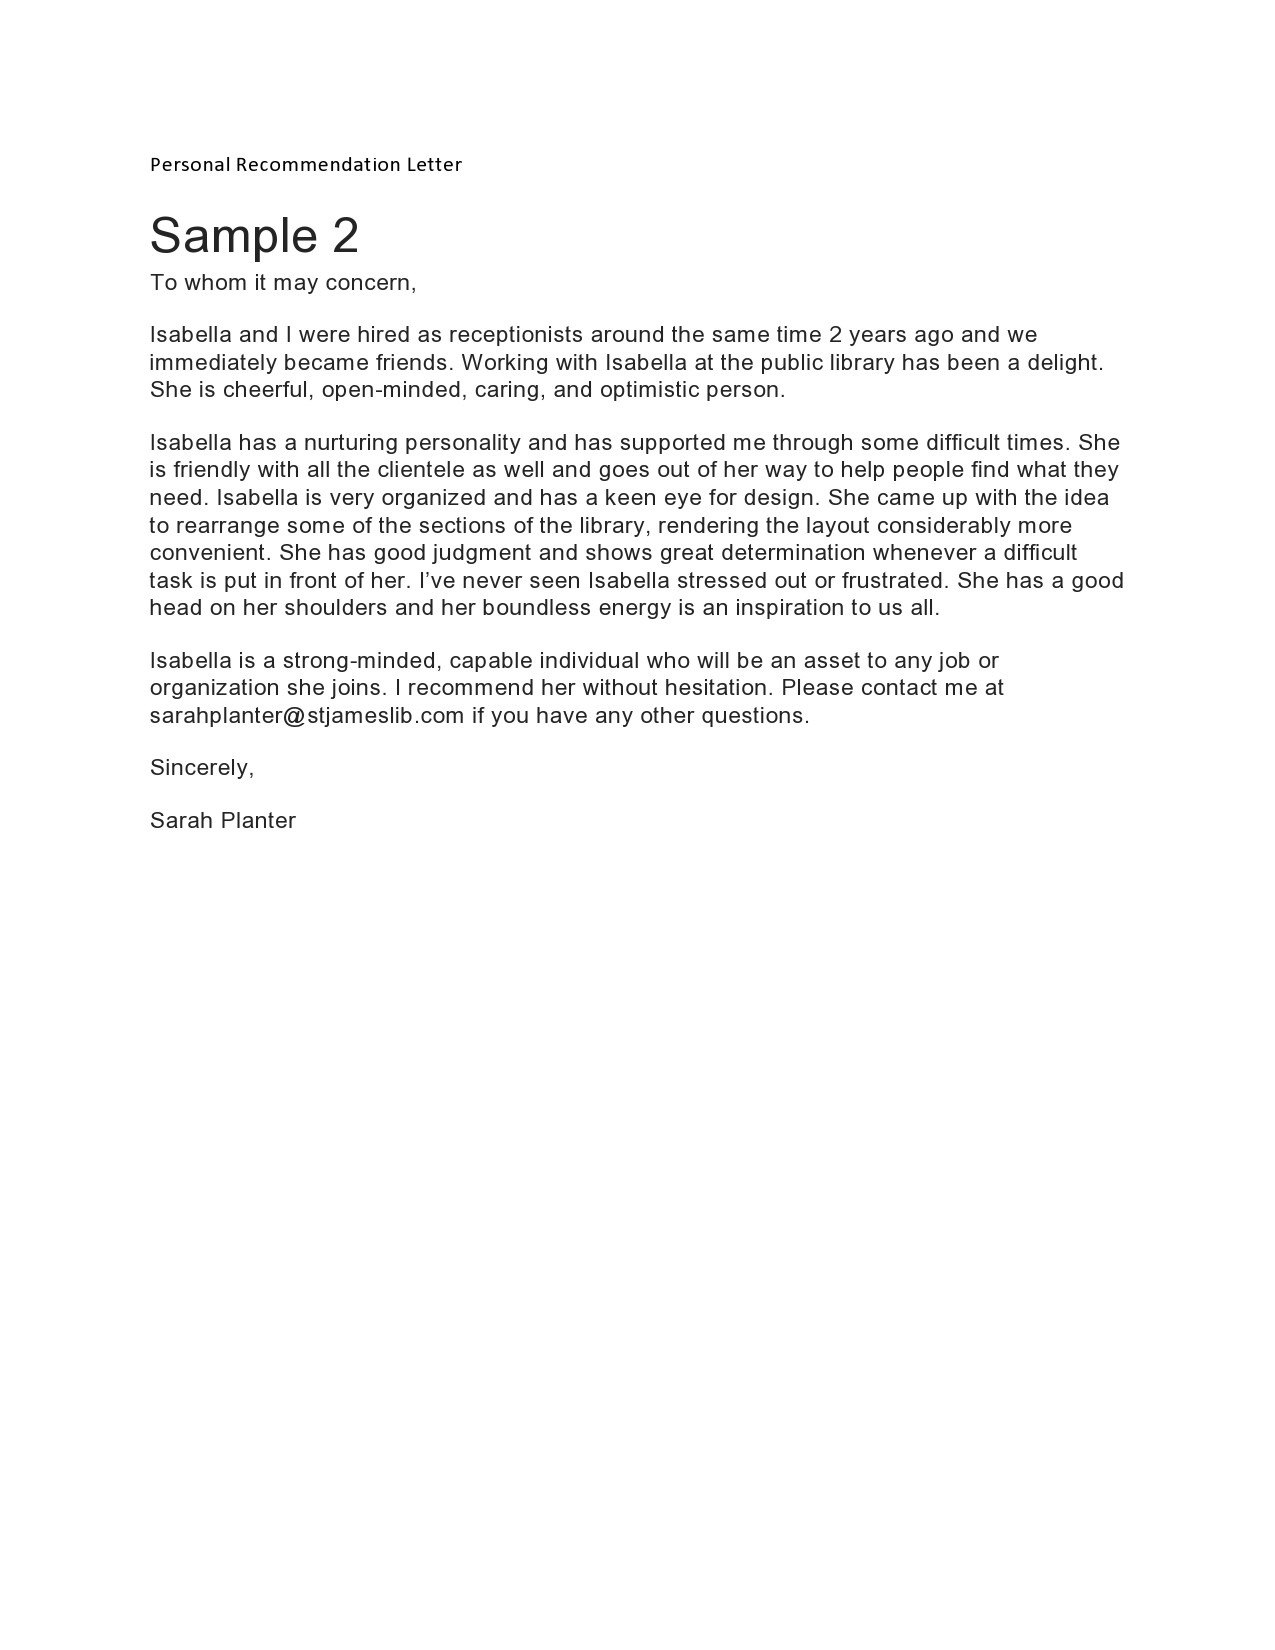 Free personal letter format 32